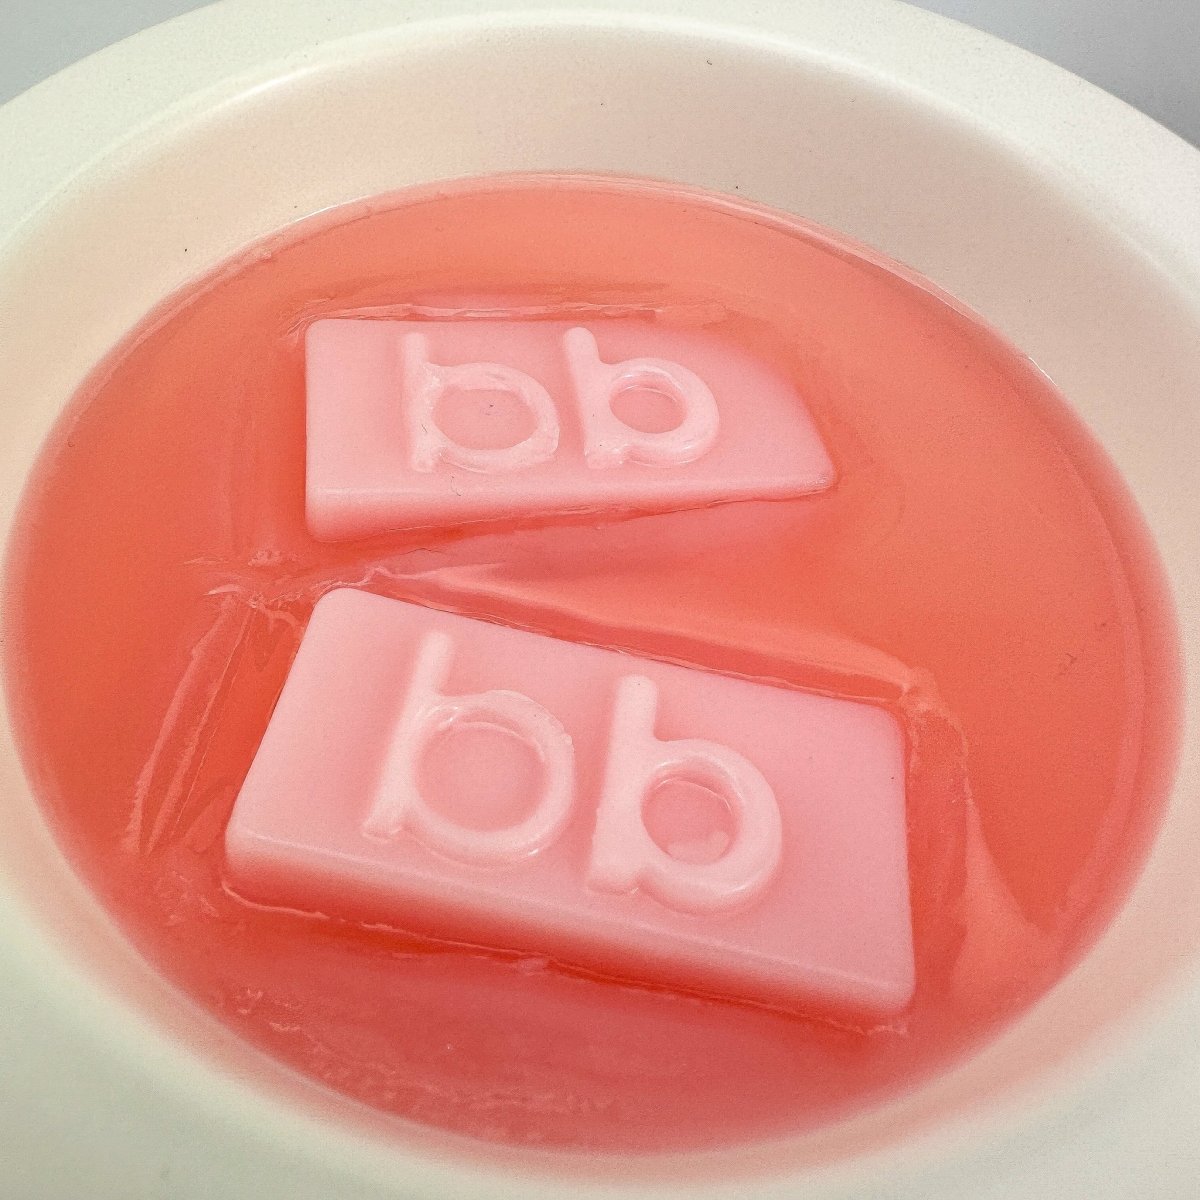 Watermelon Natural Soy Wax Melts - Candle Alternative Aromatherapy & Strong Scent Fragrance Made in Australia by Bath Box